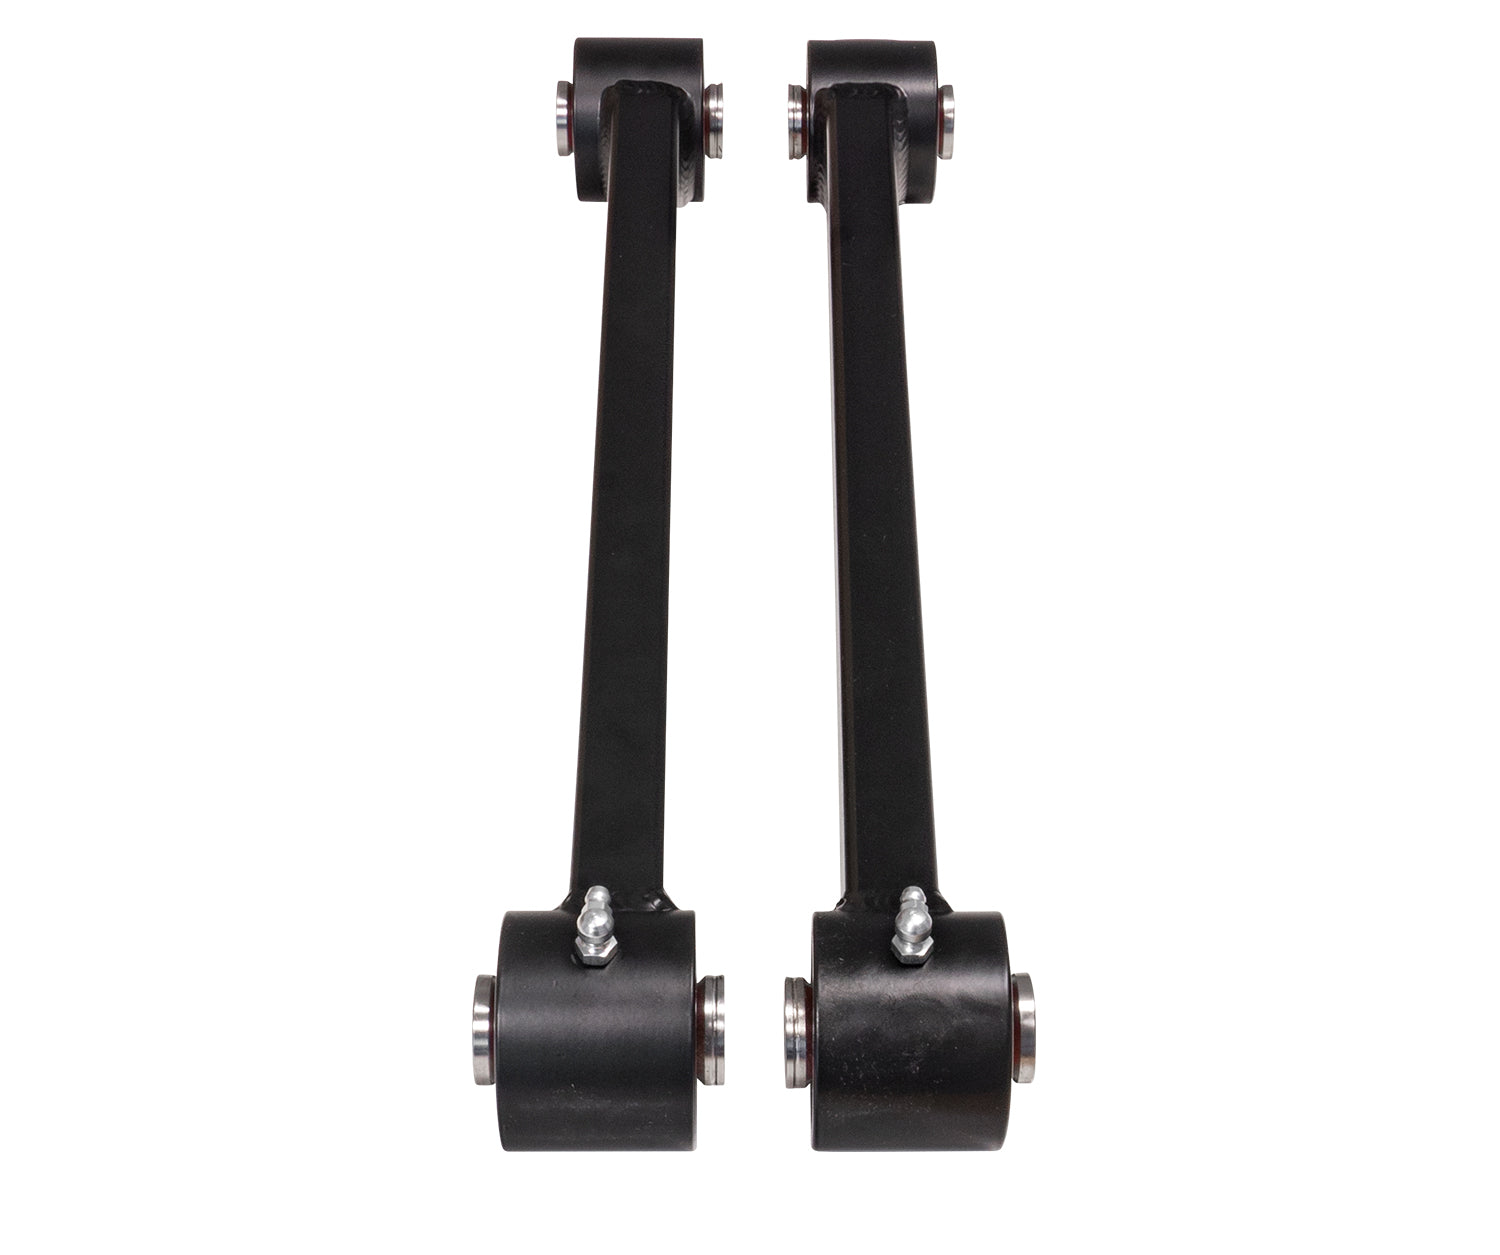 '94-12 Ram 2500/3500 Carli Suspension Extended Control Arms